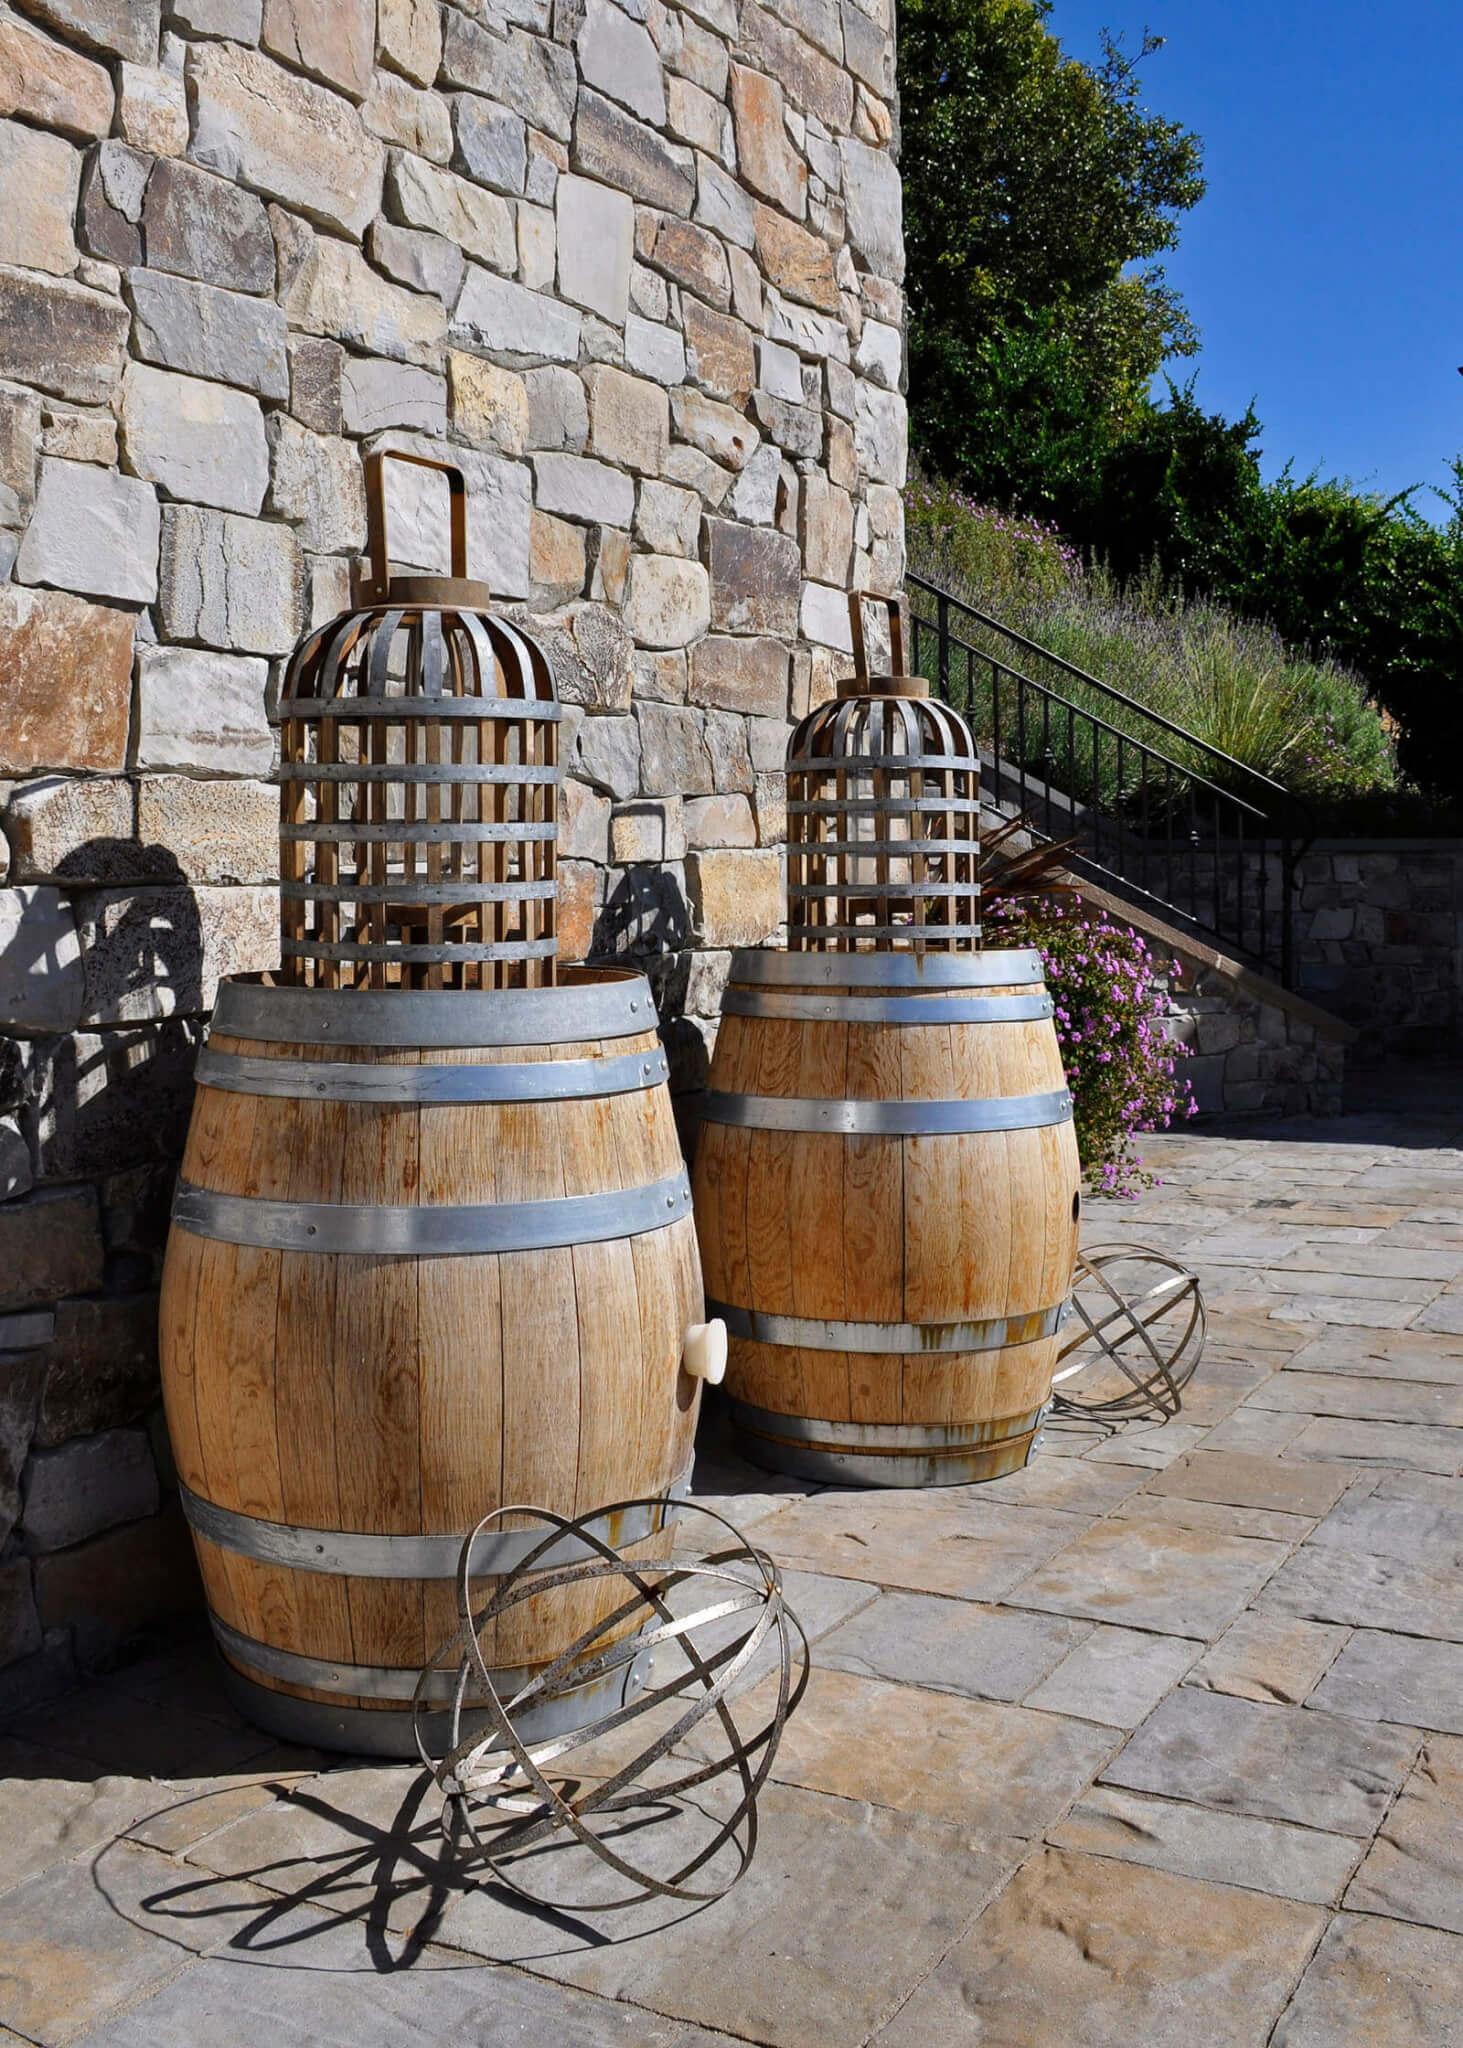 Wooden barrels with rustic cages and stone wall and patio